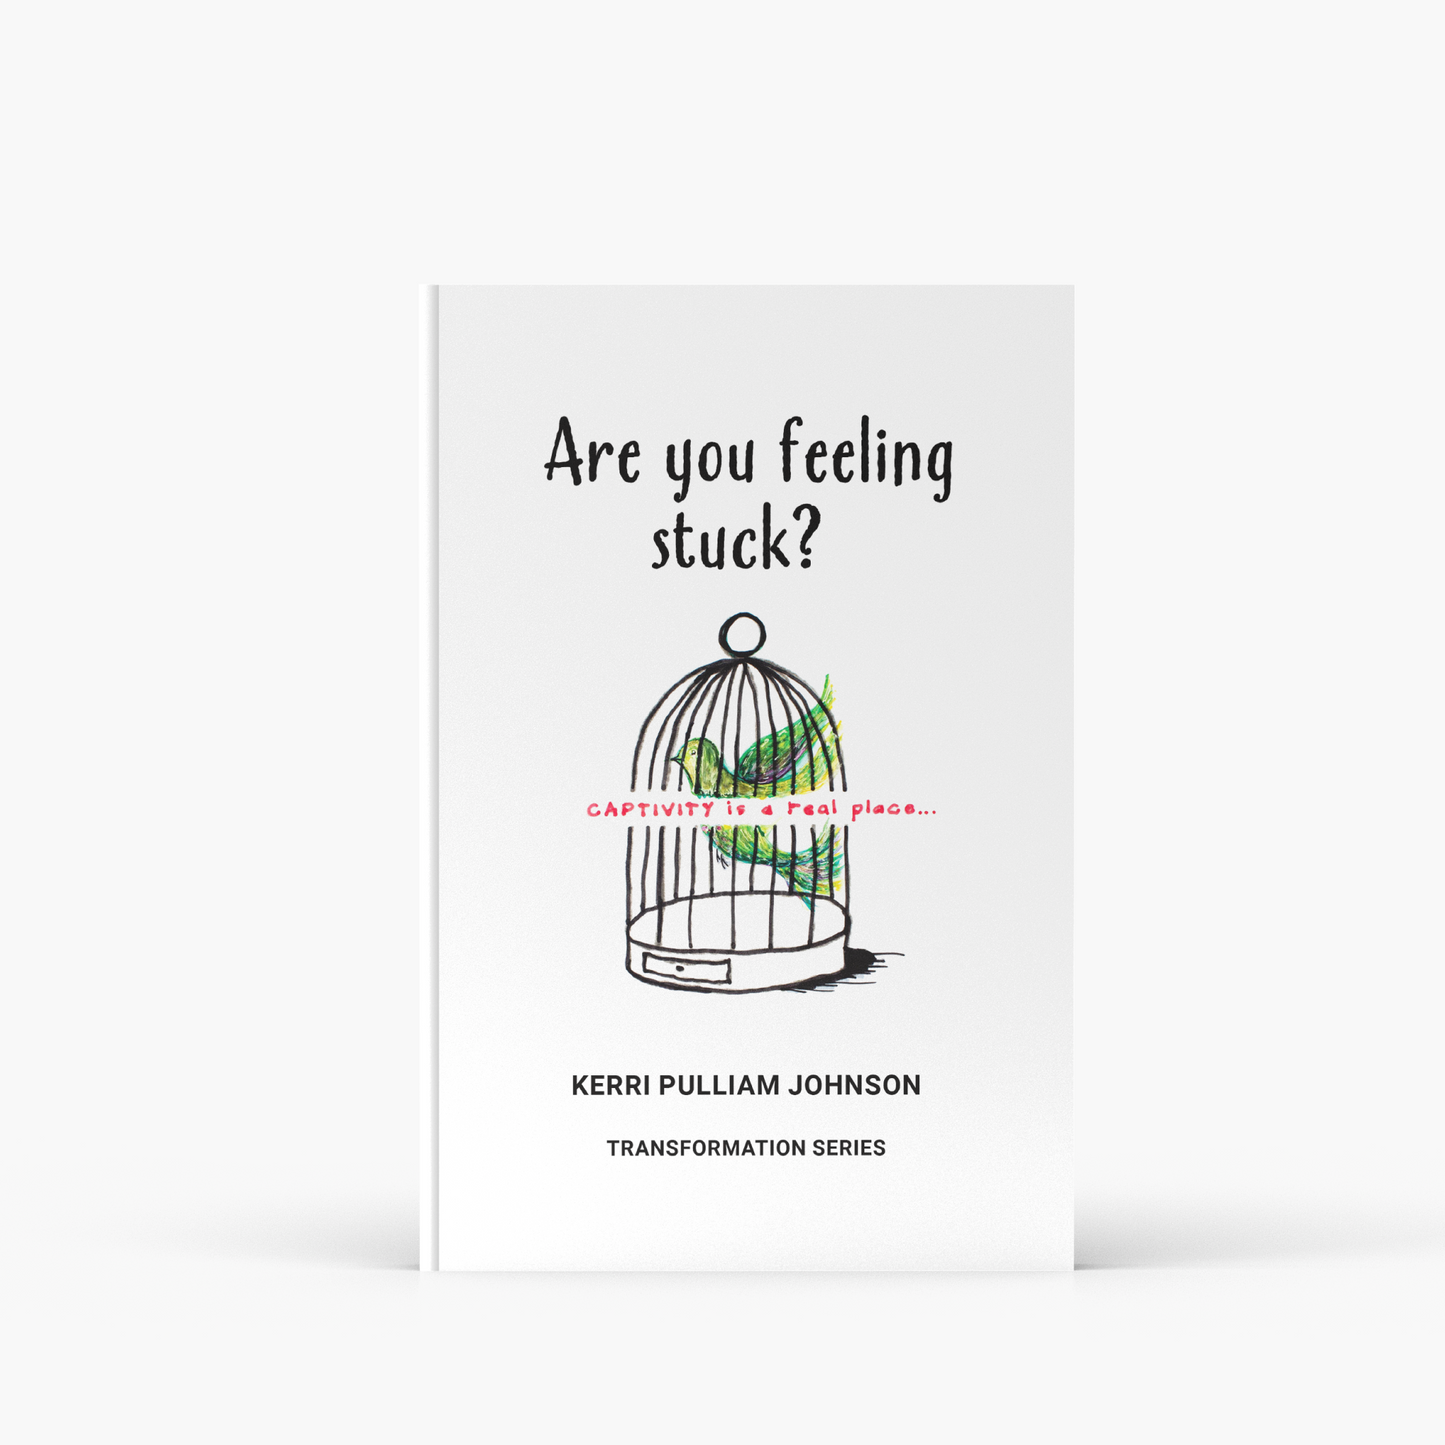 Are You Feeling Stuck? : Captivity Is a Real Place